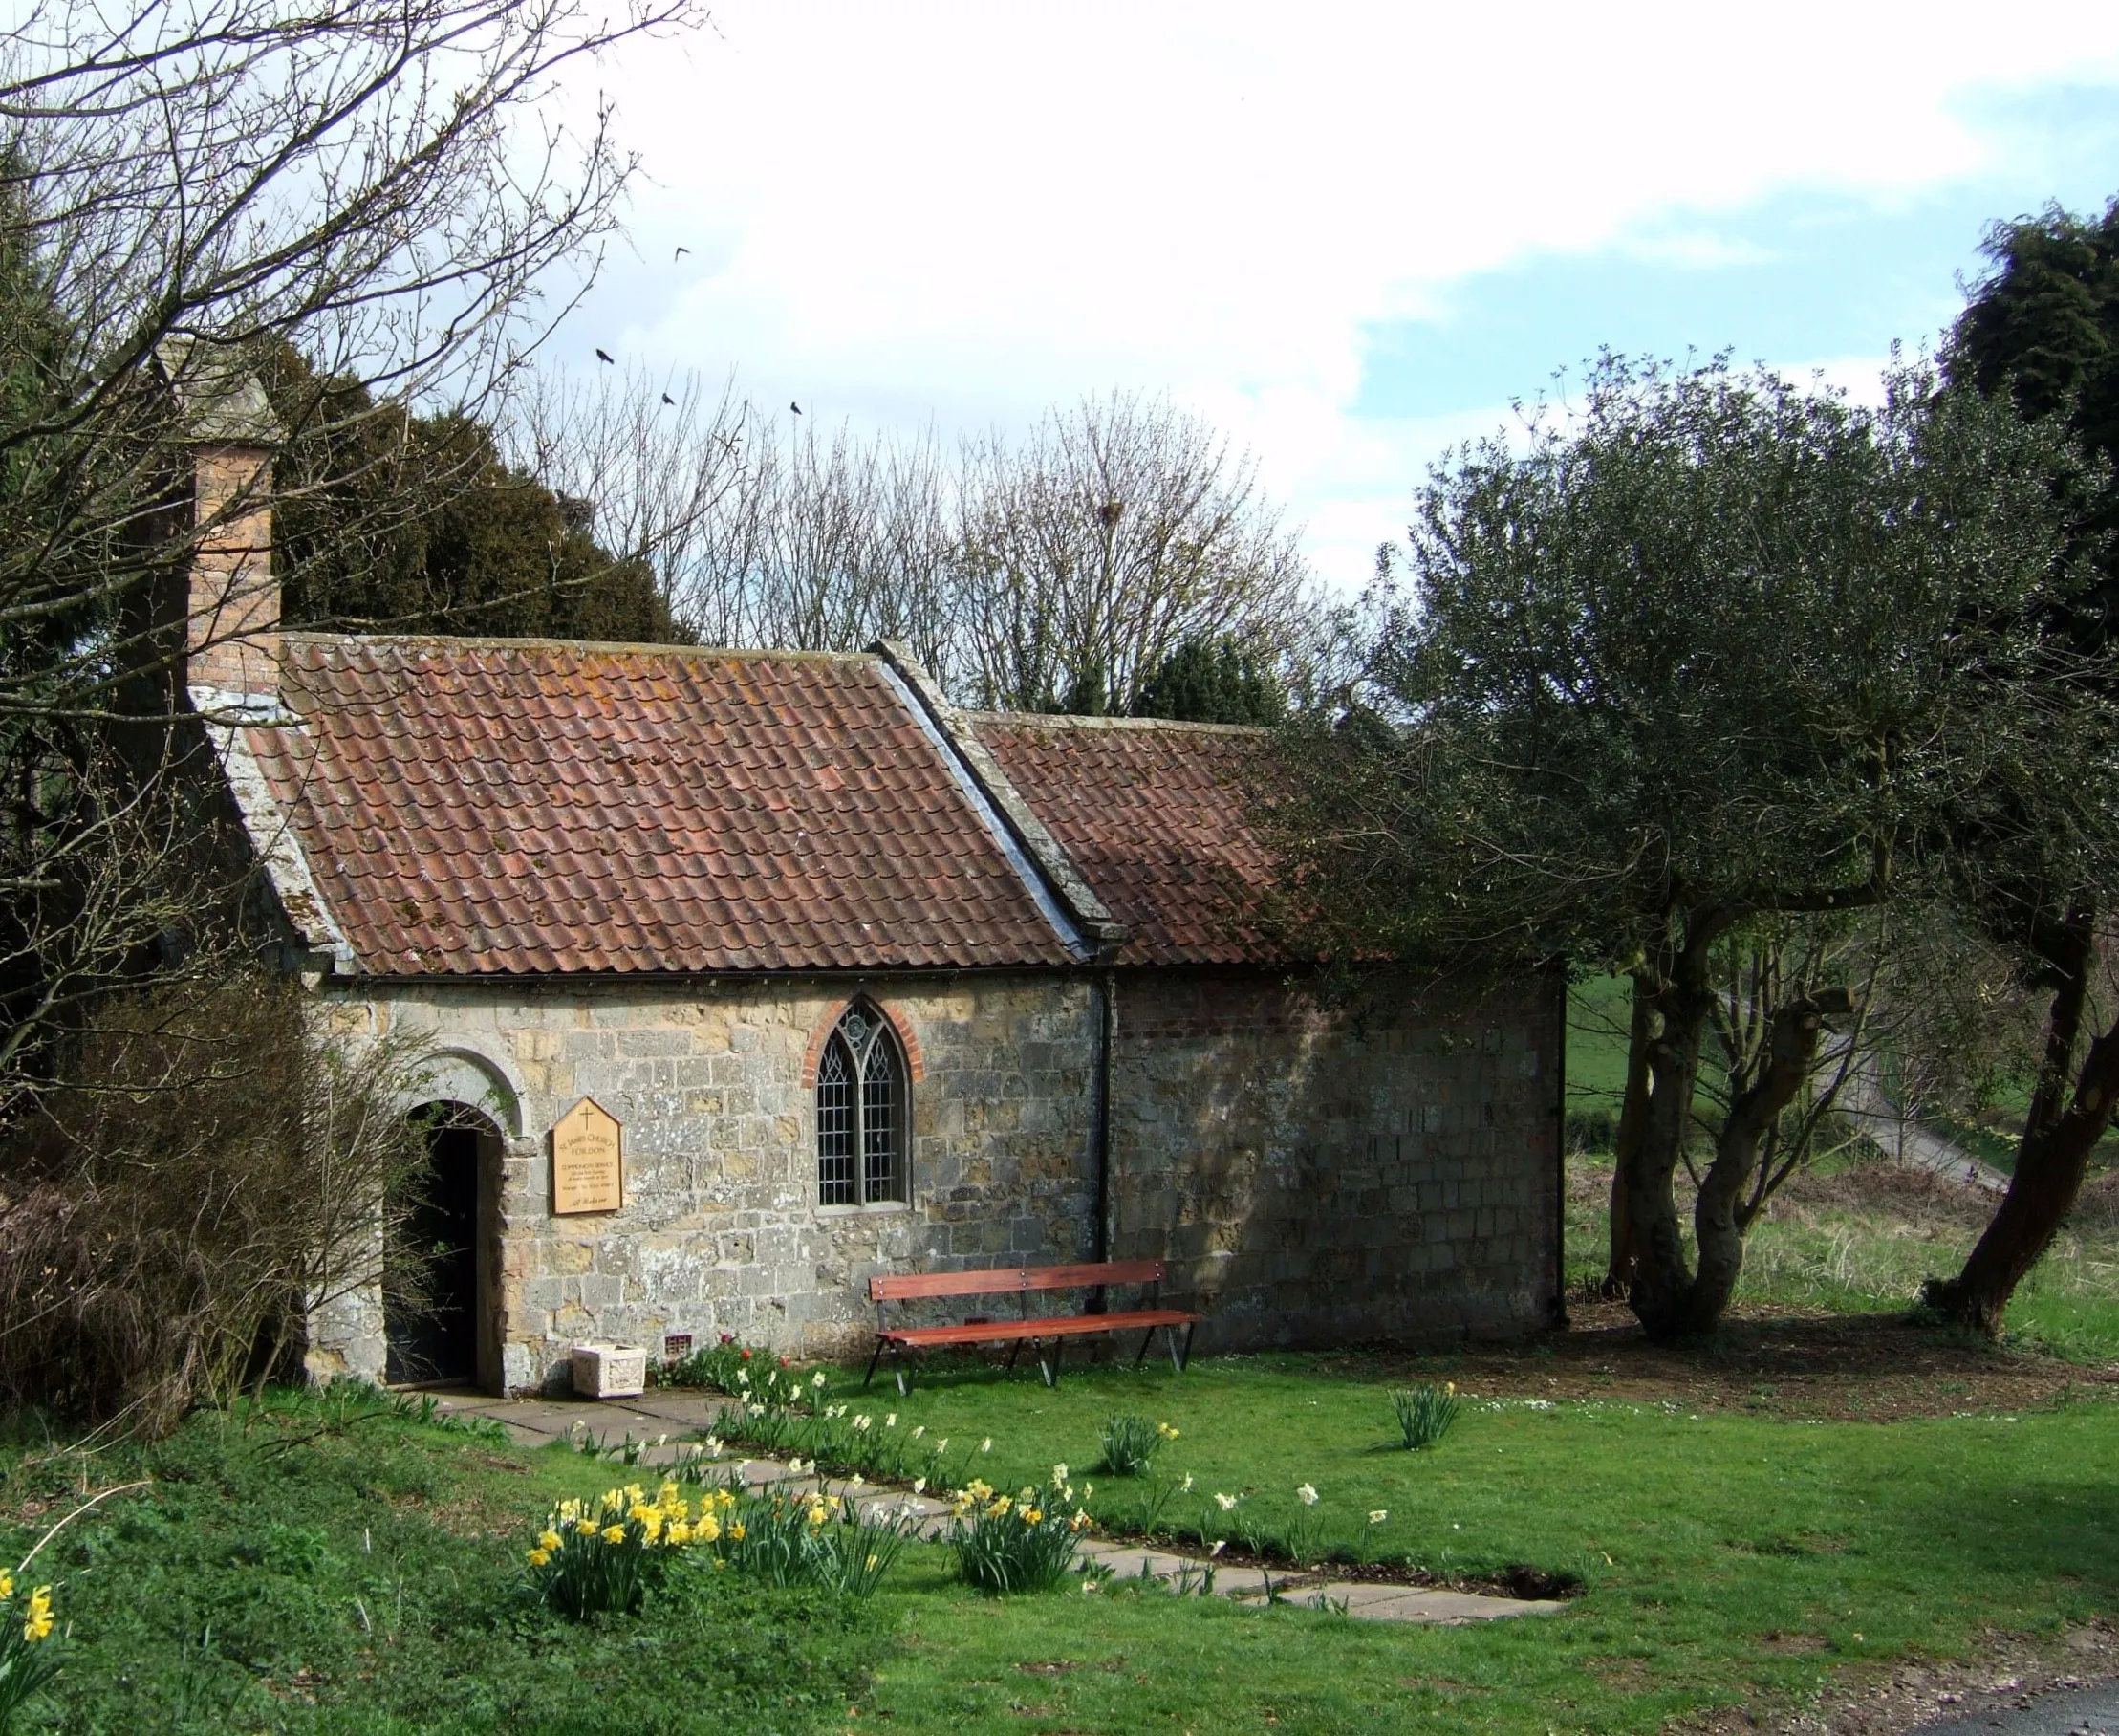 Photograph of St James Church, Fordon, Yorkshire Wolds